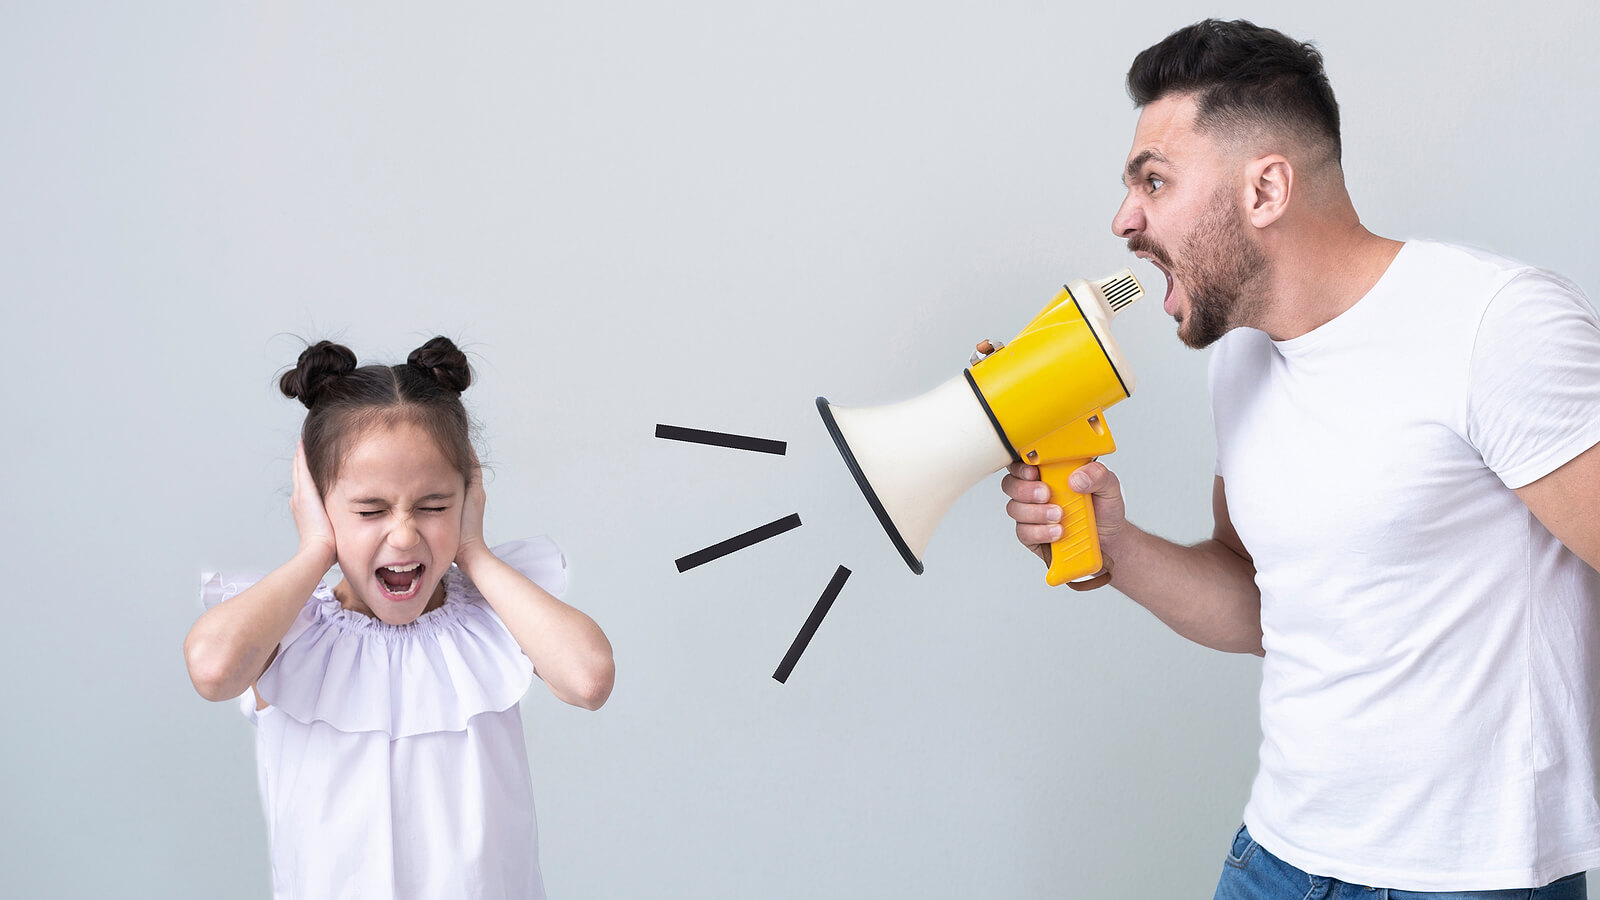 A father shouting at his daughter with a megaphone while she covers her ears.